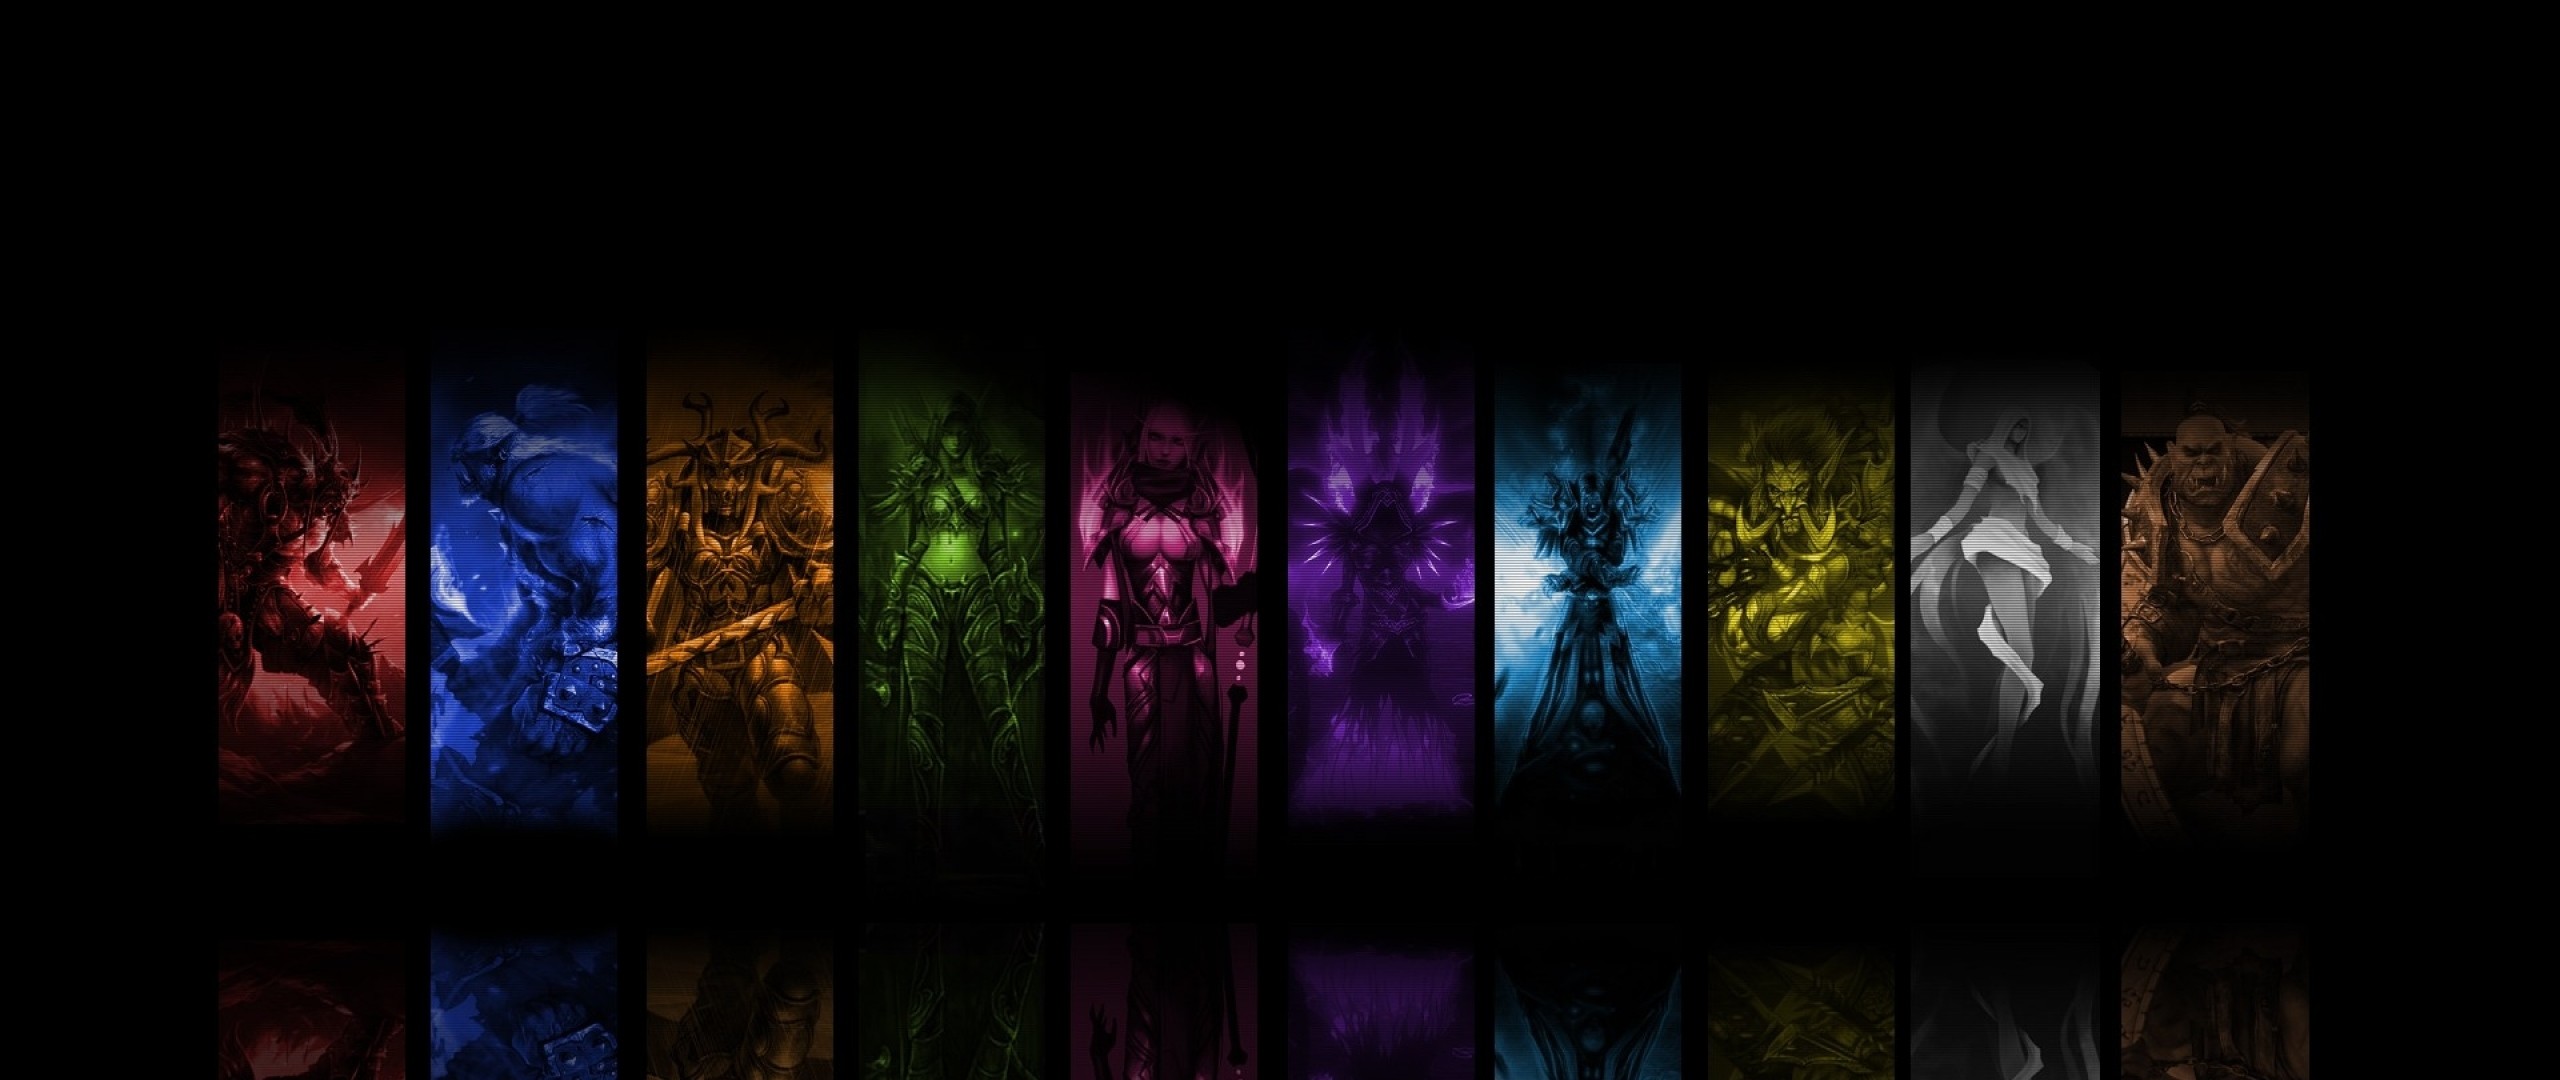 978746 full size world of warcraft priest wallpaper 2560x1080 for meizu